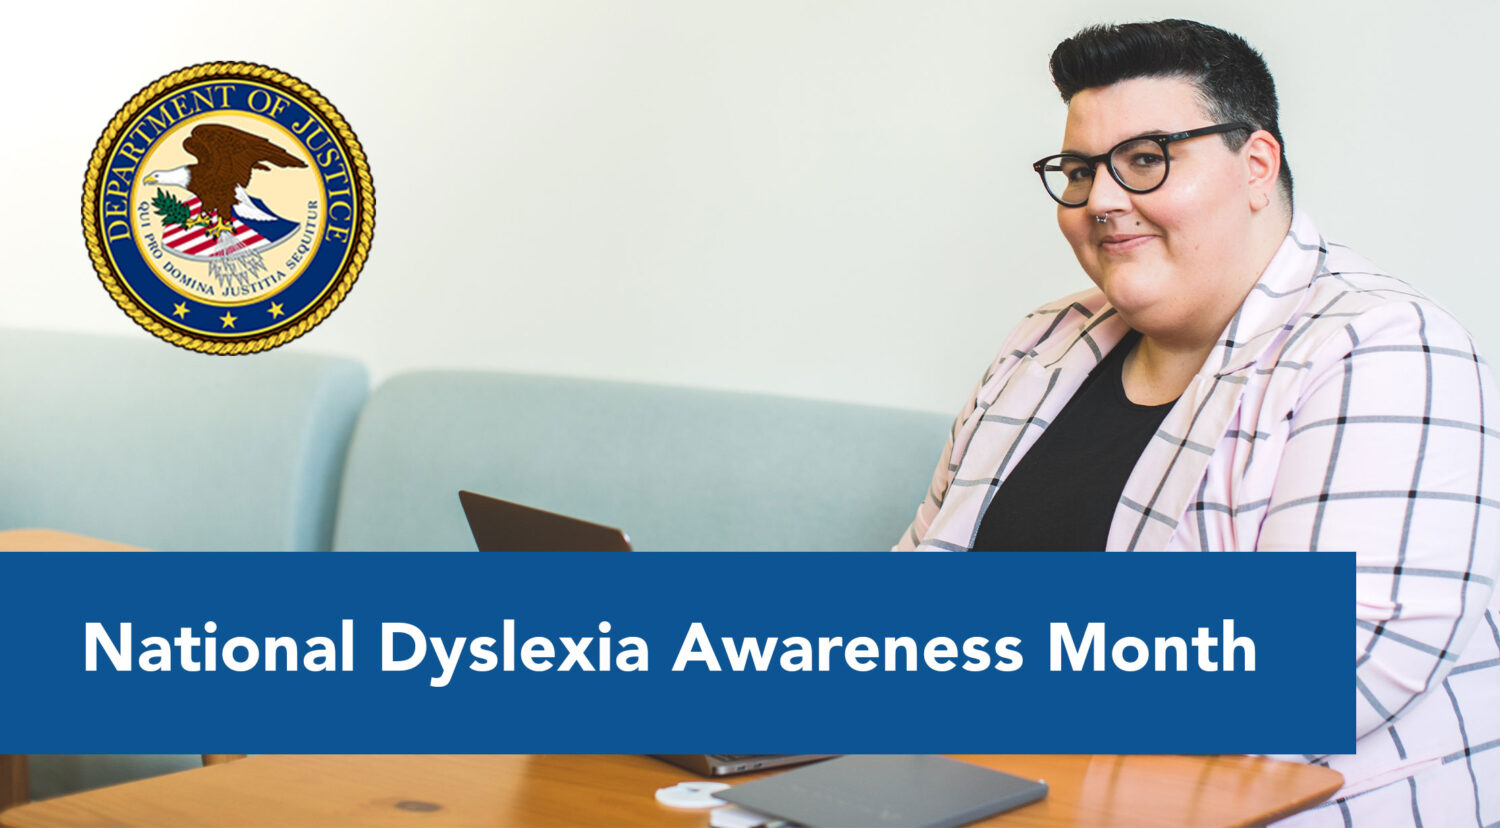 October is National Dyslexia Awareness Month